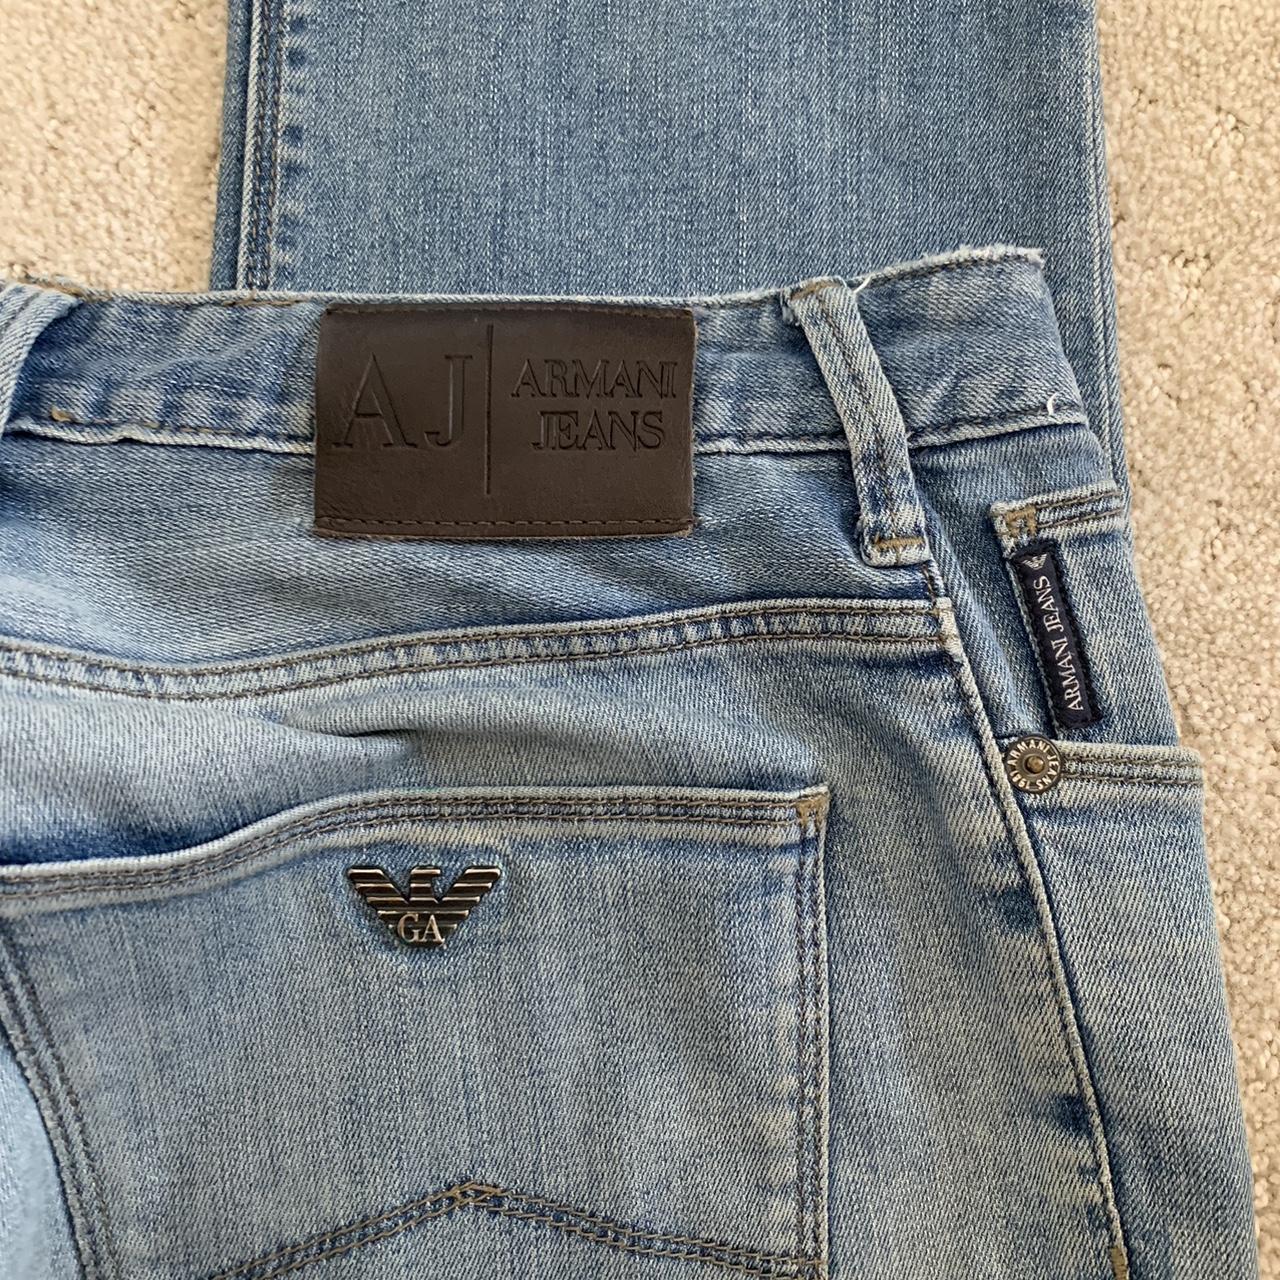 Armani Jeans Men's Blue and Navy Jeans